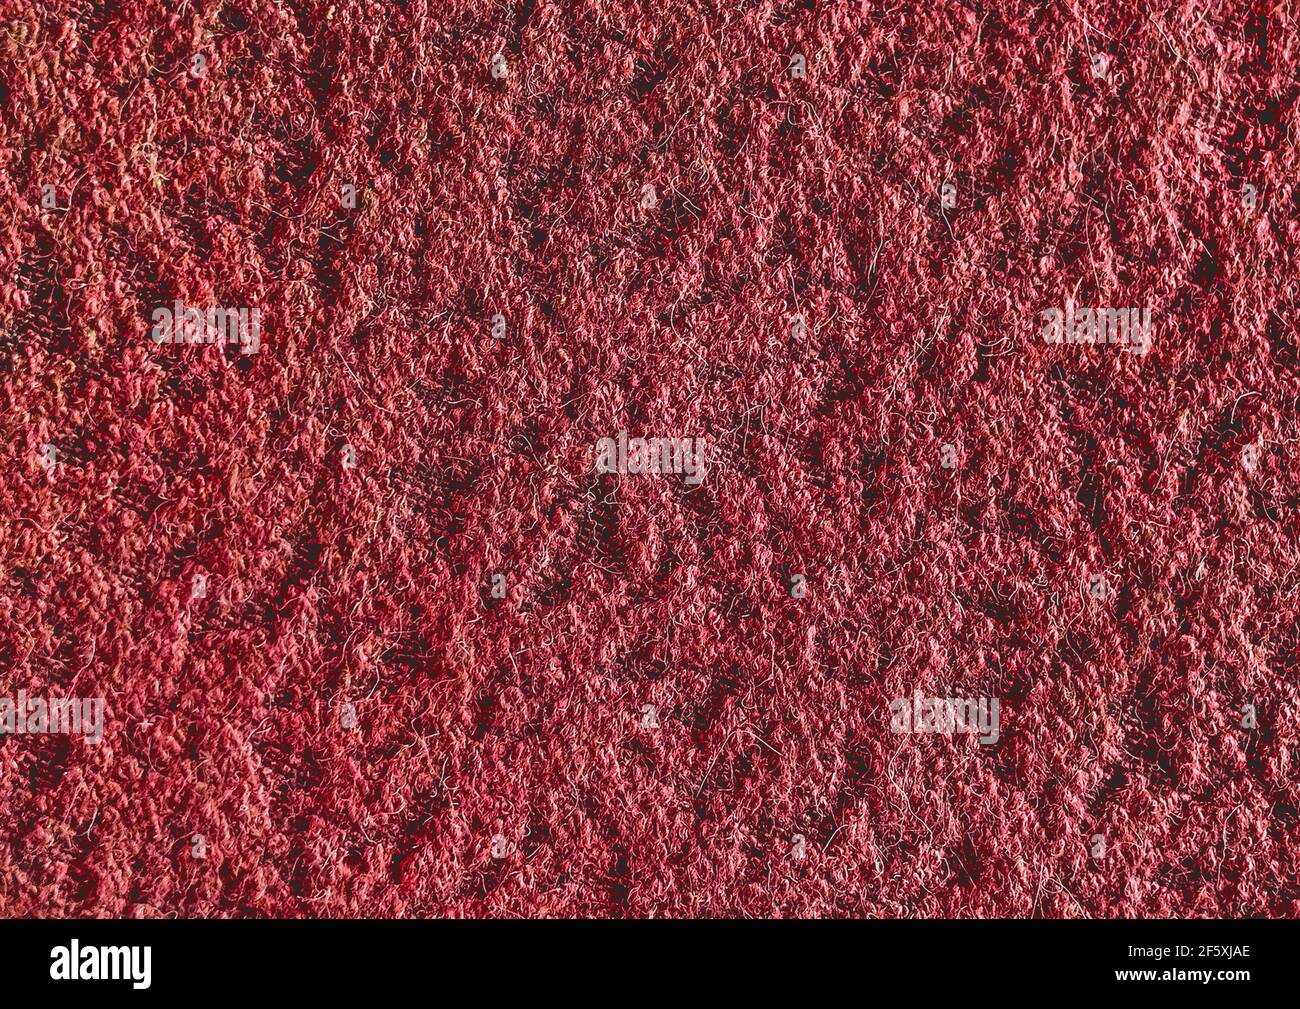 Red cloth waves background texture Stock Photo by FabrikaPhoto